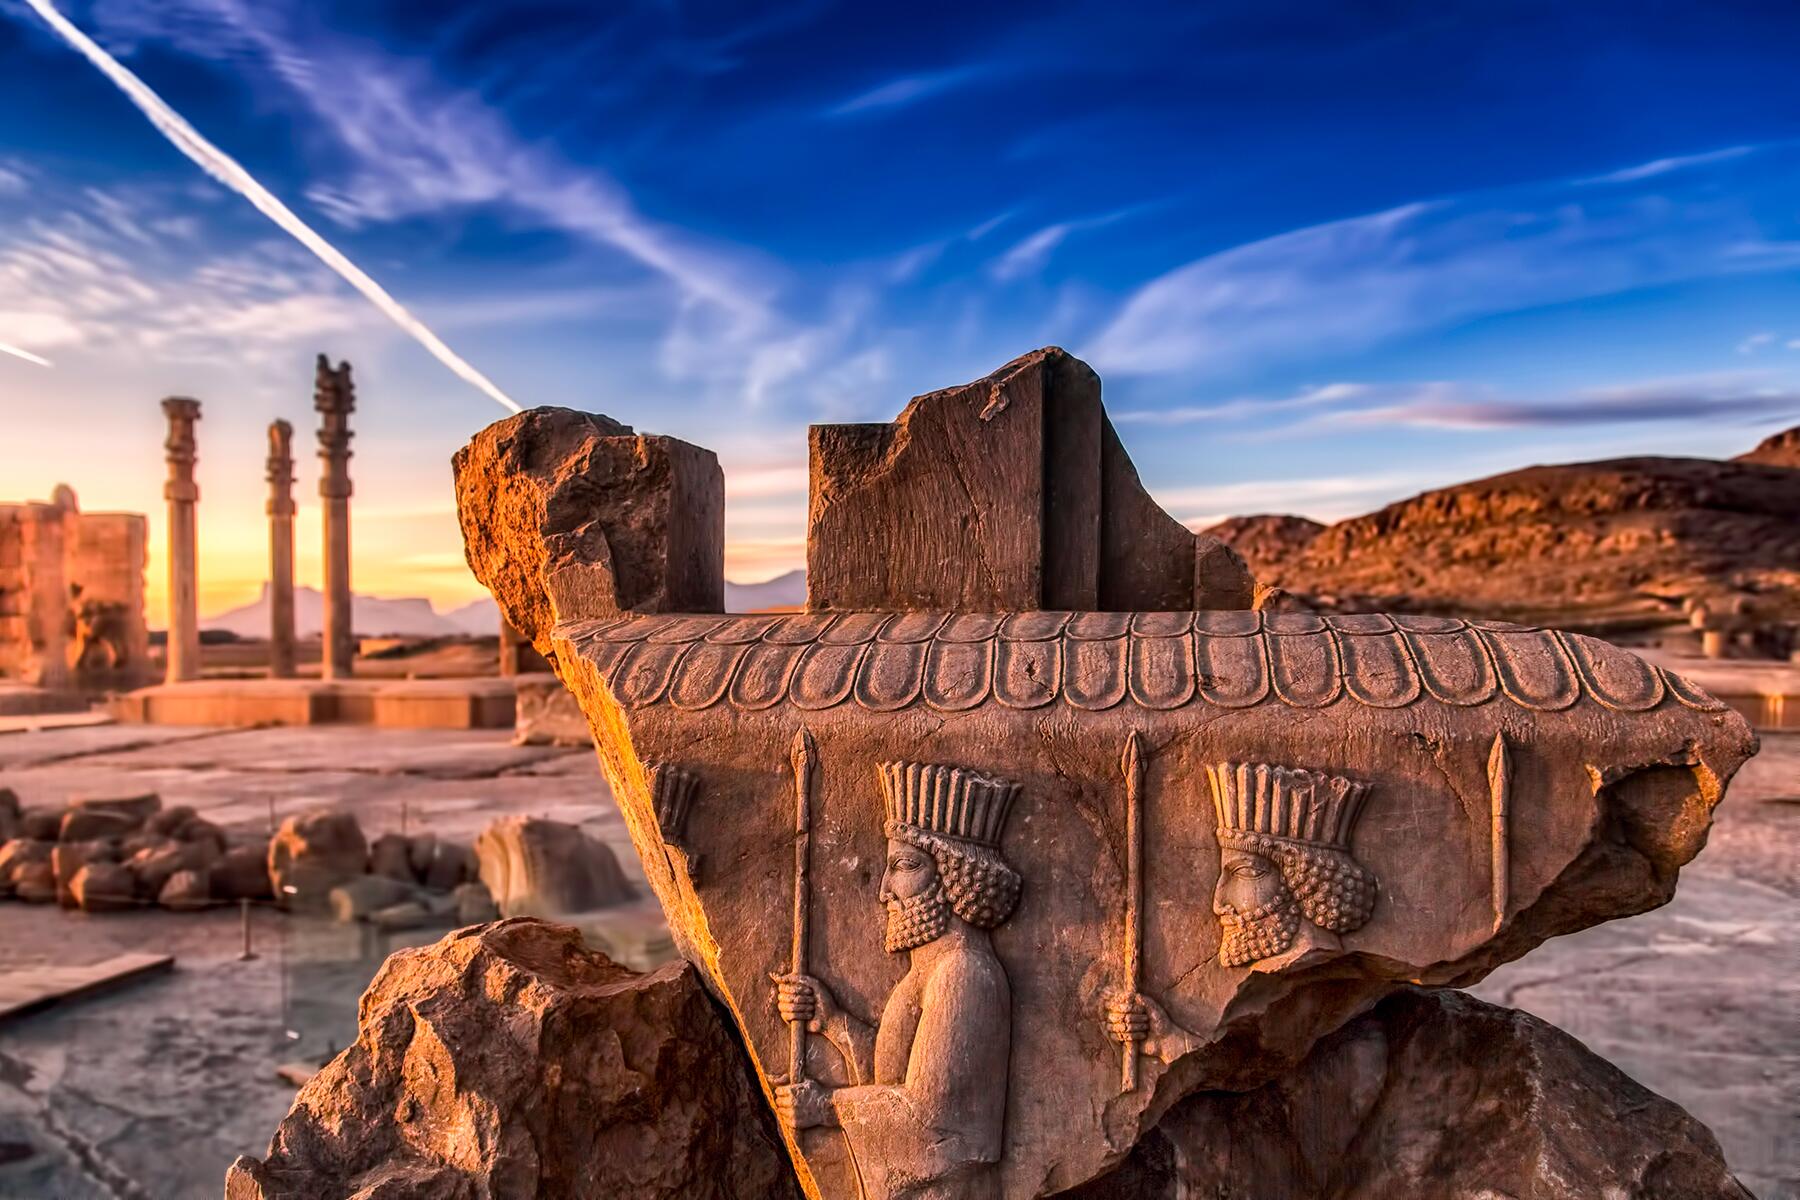 The 10 Most Beautiful and Important Cultural Sites in Iran